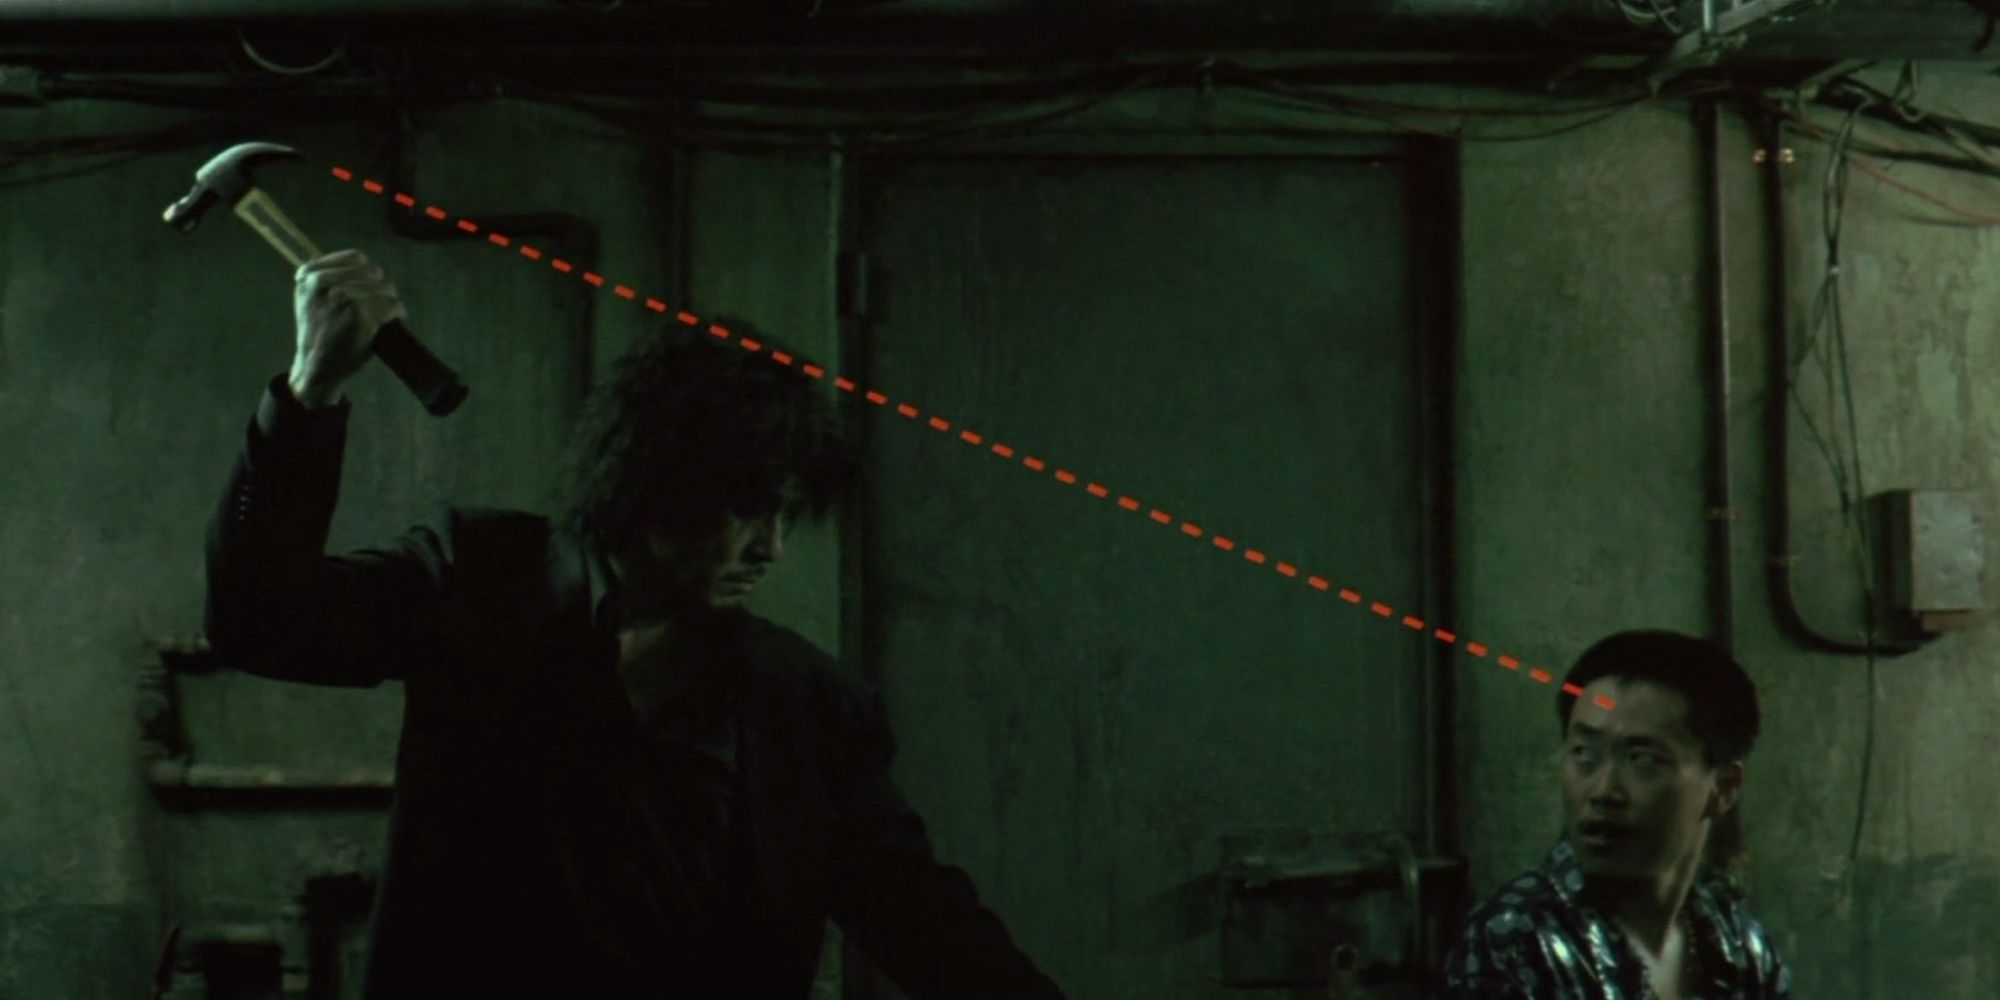 Choi Min-sik as Oh Dae-su about to hit a man with a hammer, a red dotted line pointing the trajectory, in 'Oldboy' 